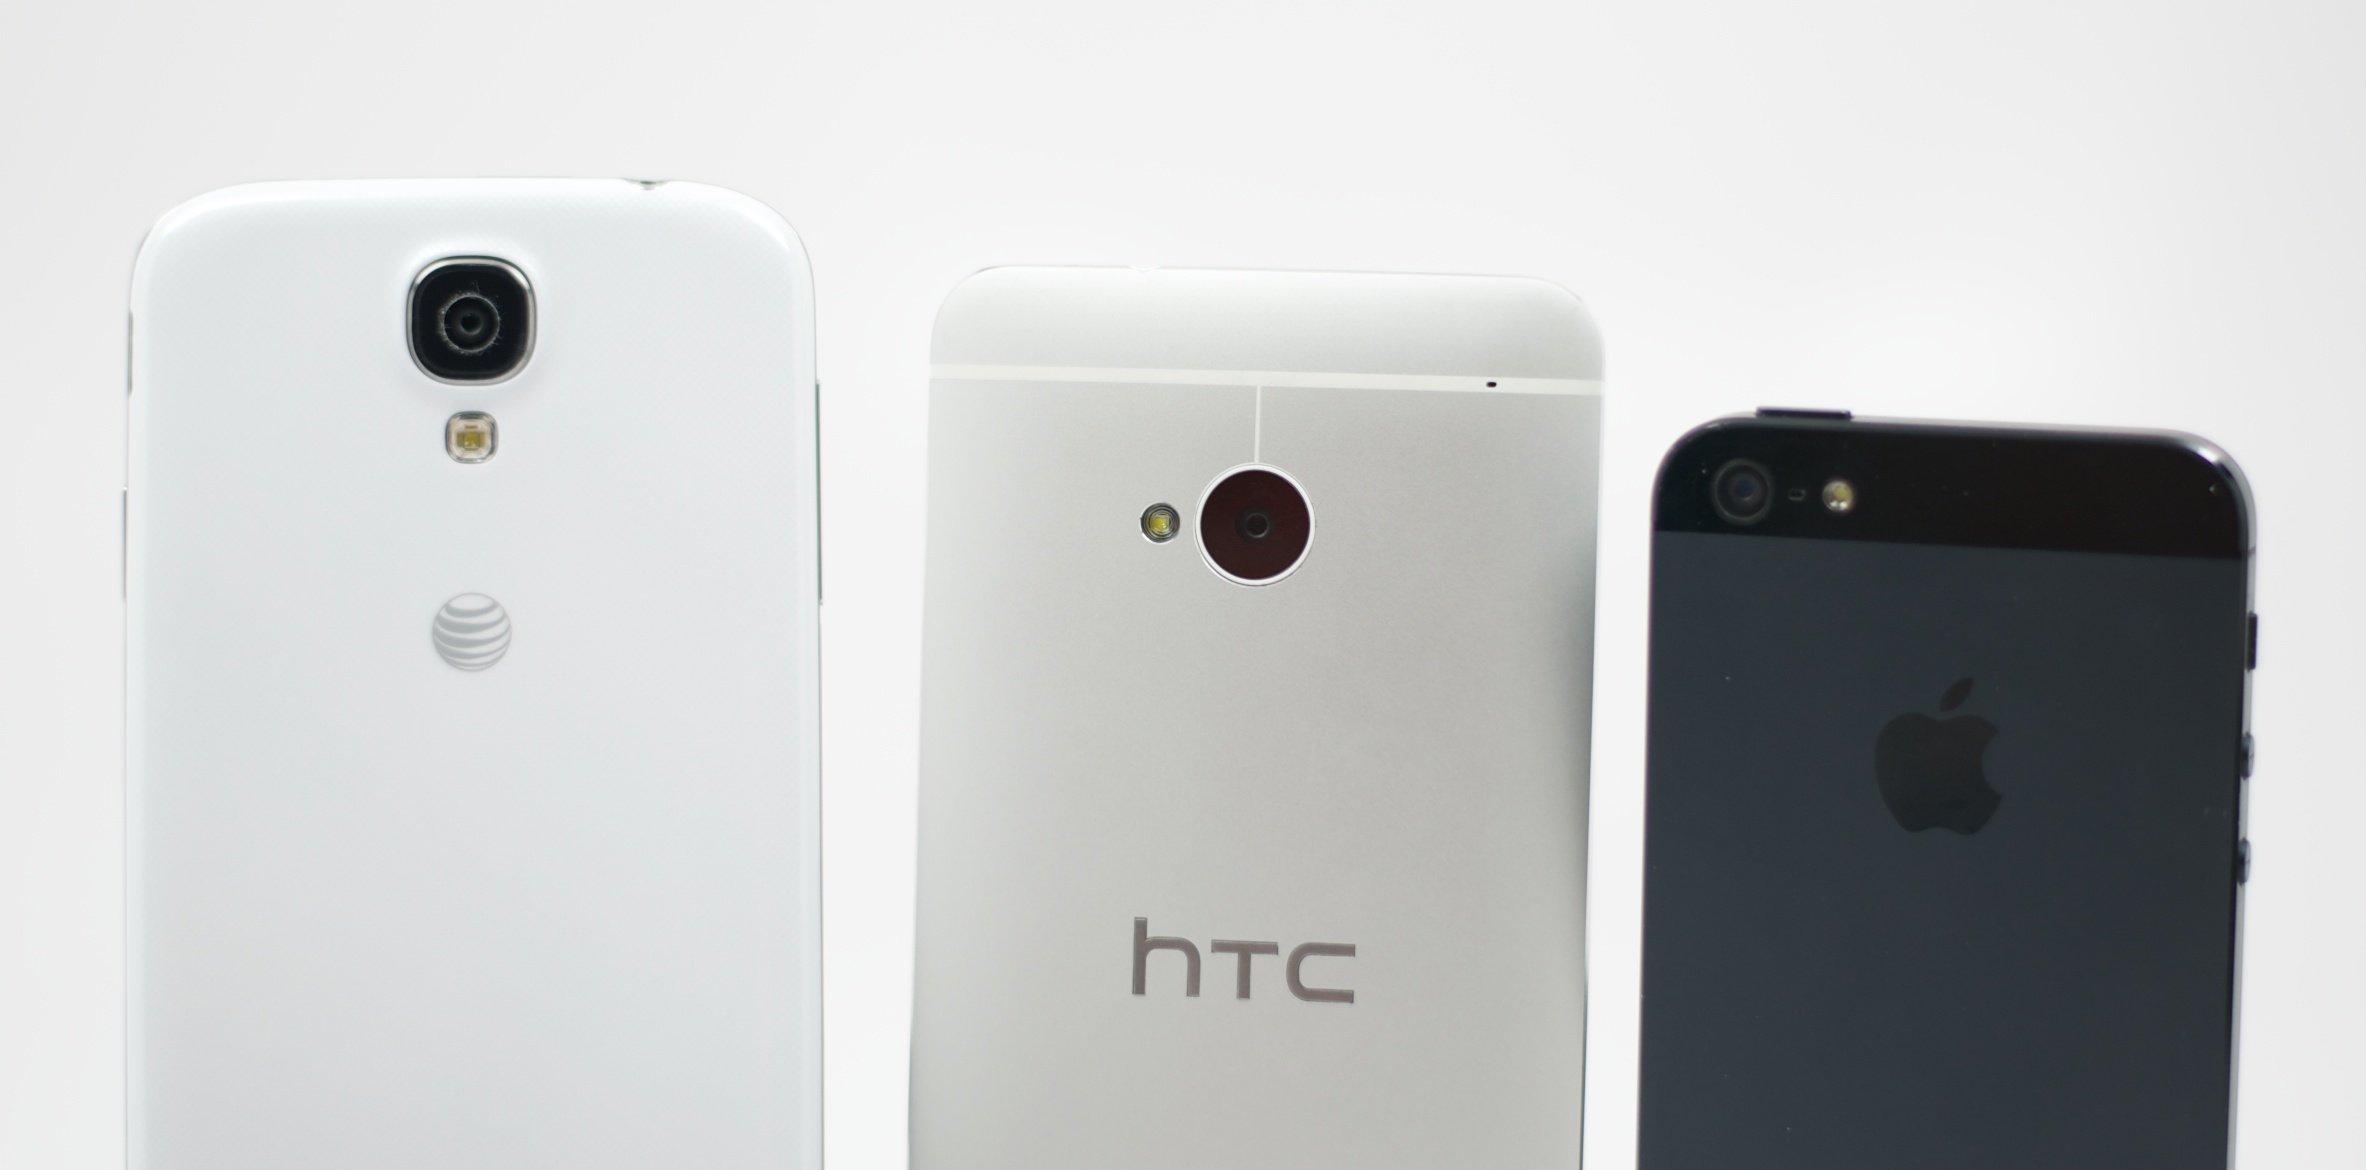 We check out the Samsung Galaxy S4 vs. HTC One vs. iPhone 5 camera comparison.